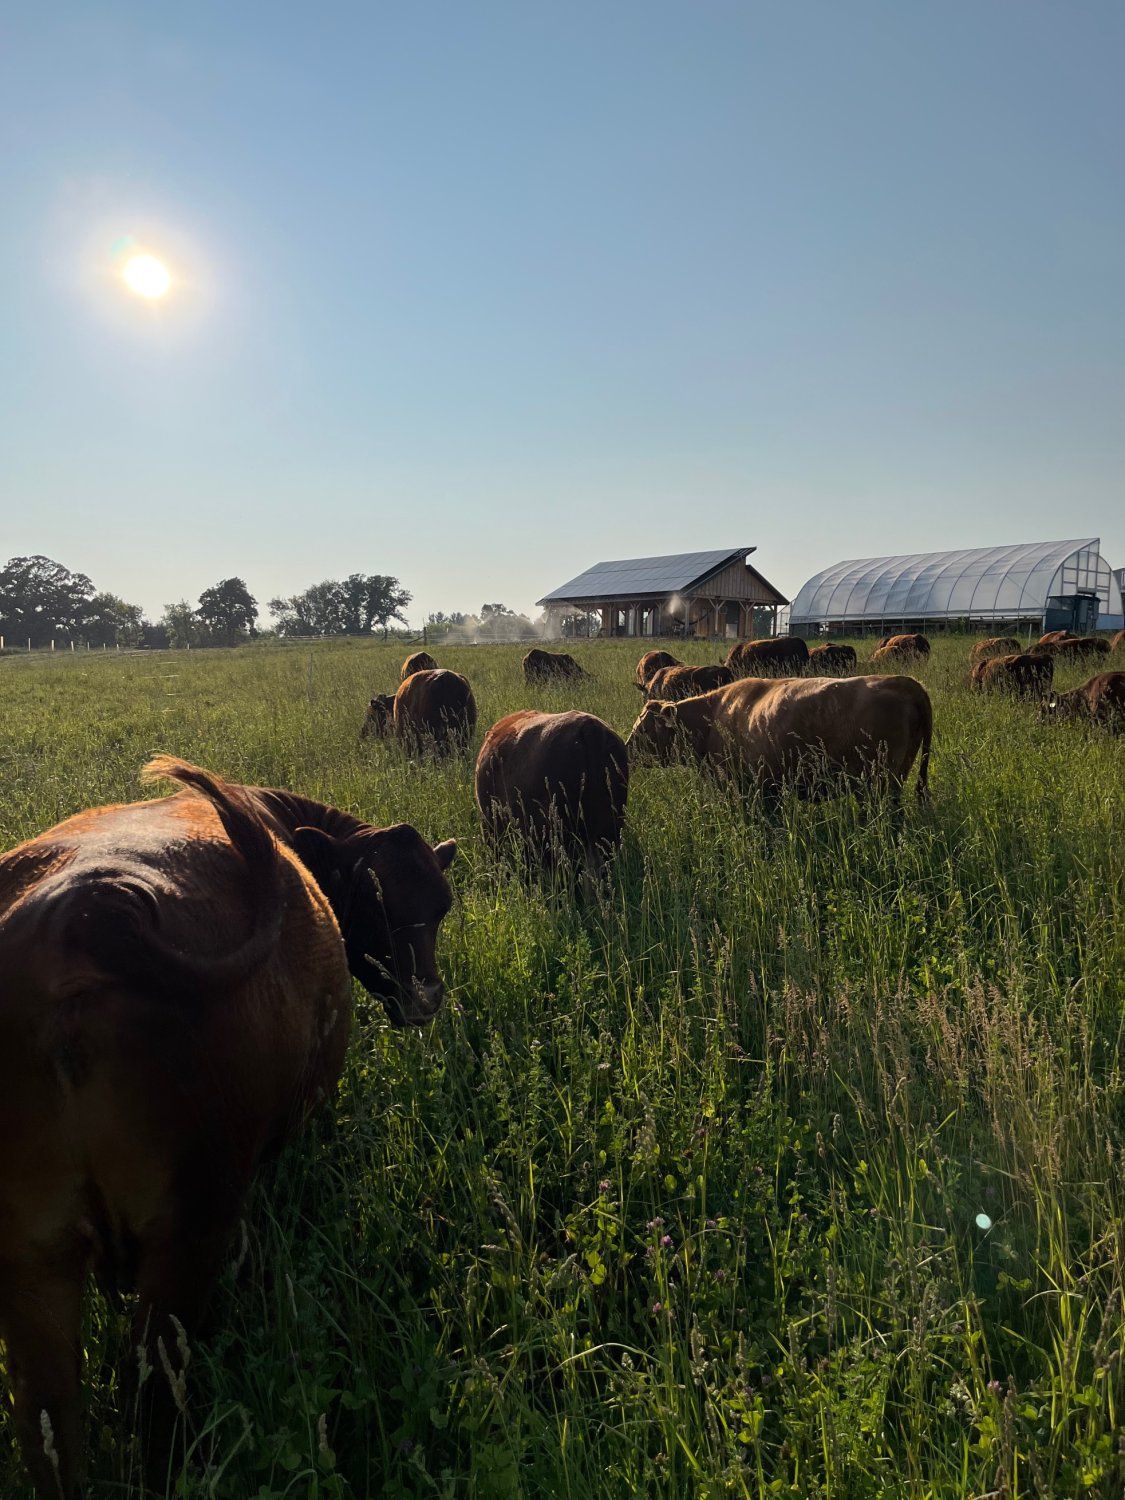 Previous Happening: Sunny Cows